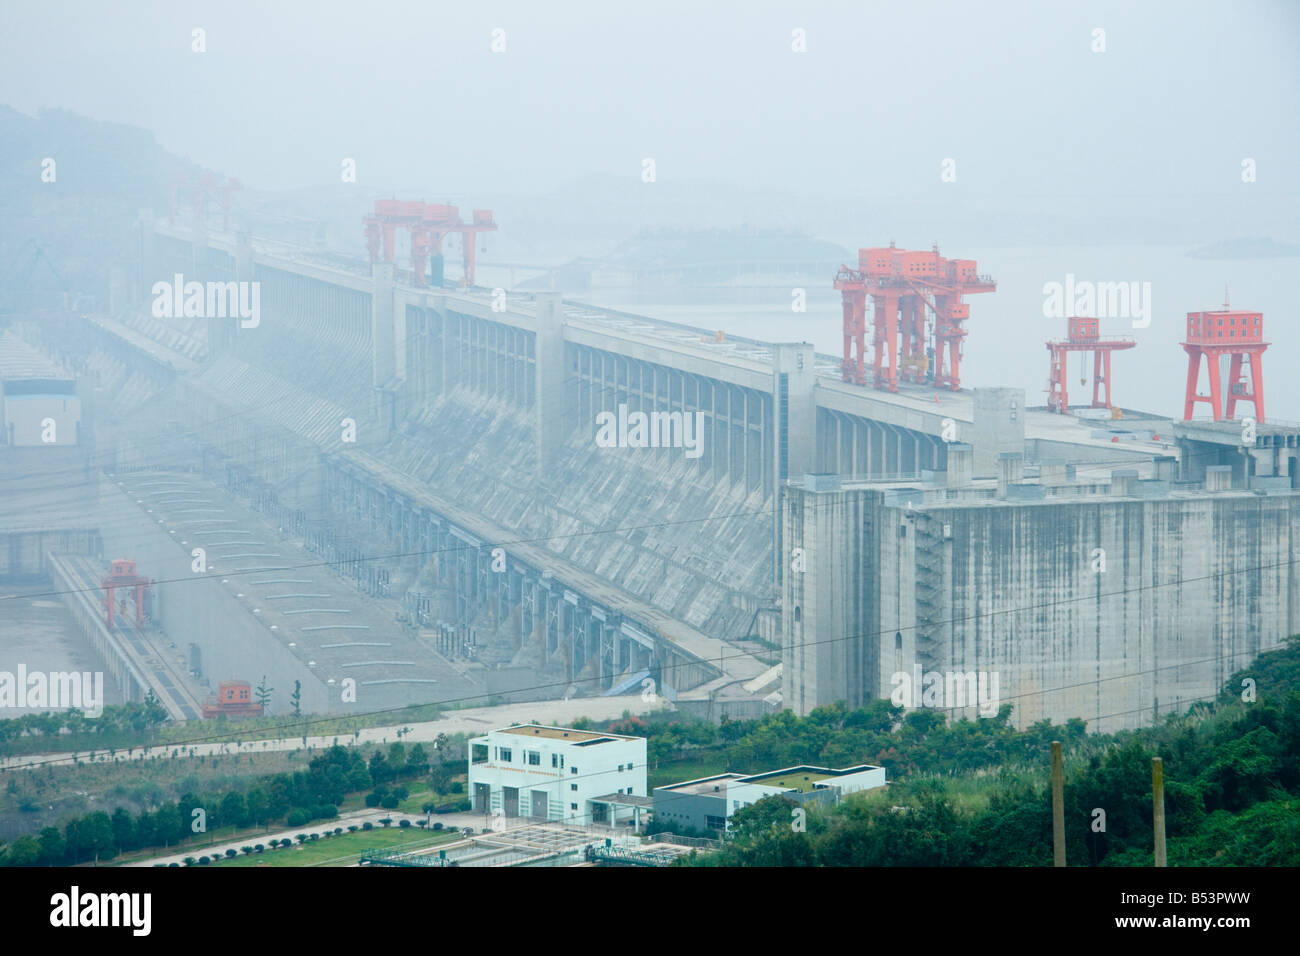 An aerial view of the Three Gorges Dam Project, China. Stock Photo